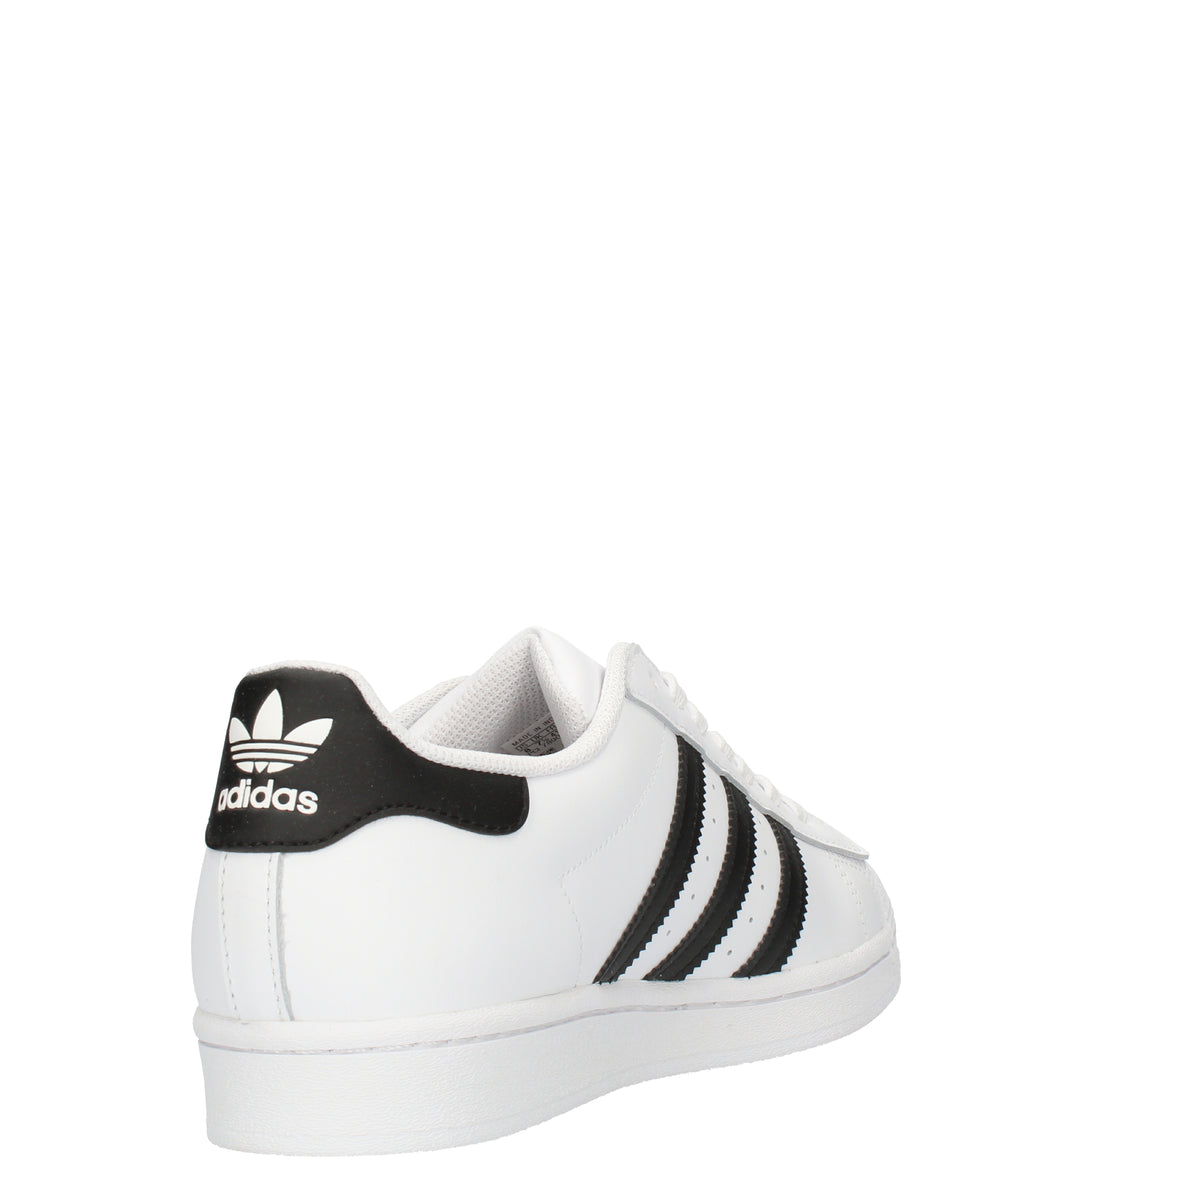 Adidas Superstar Sneakers bianche e nere